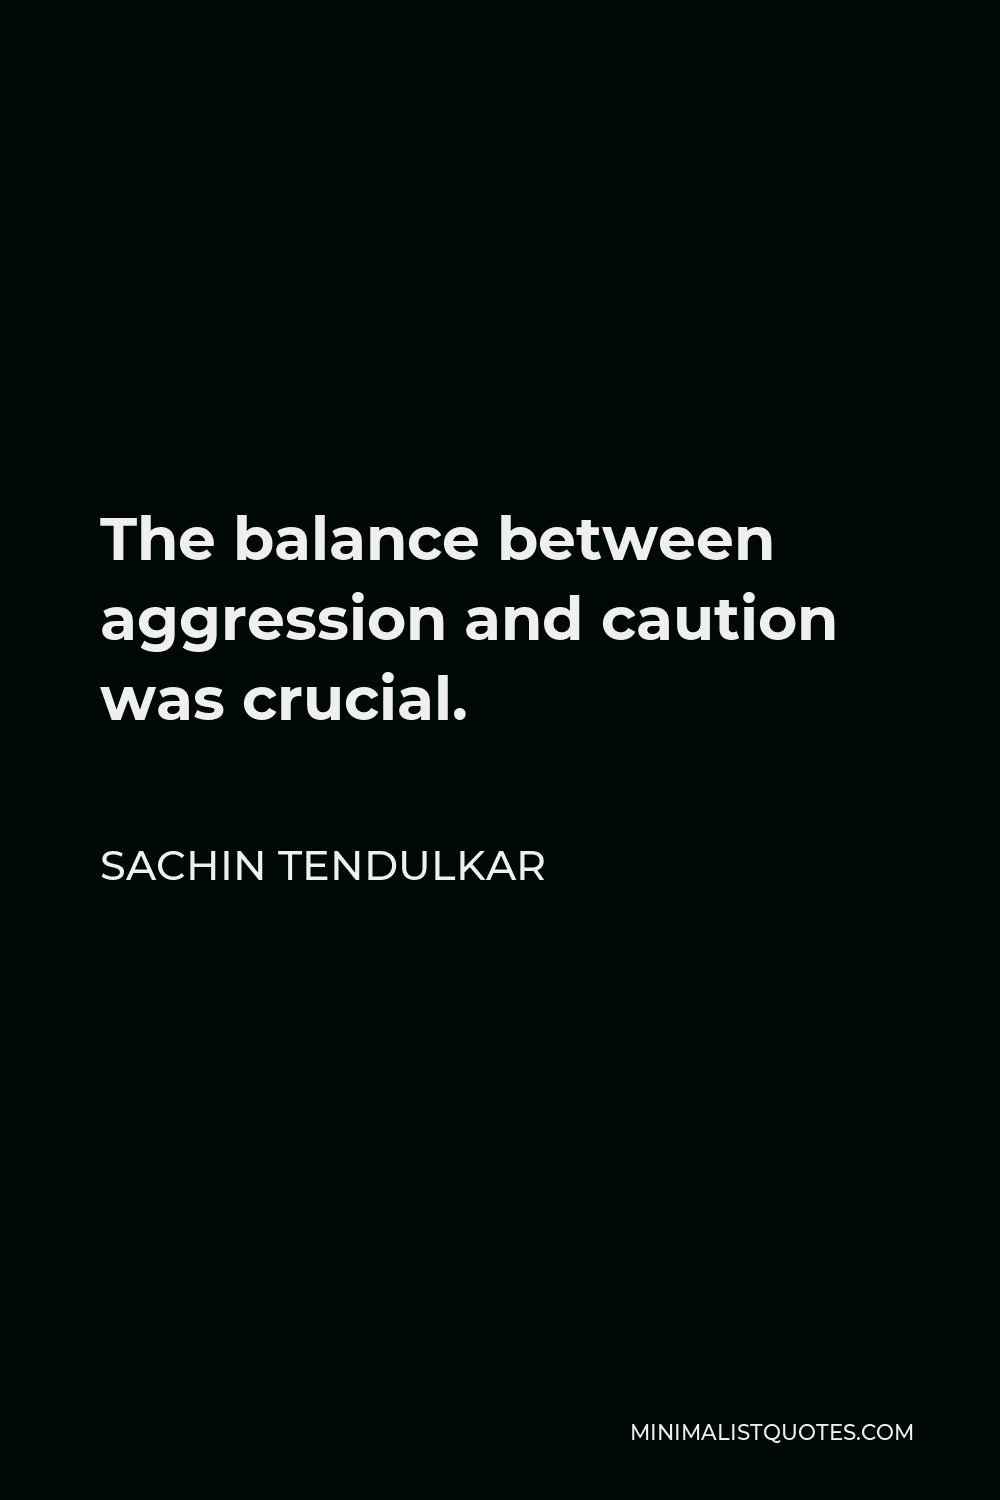 Sachin Tendulkar Quote - The balance between aggression and caution was crucial.